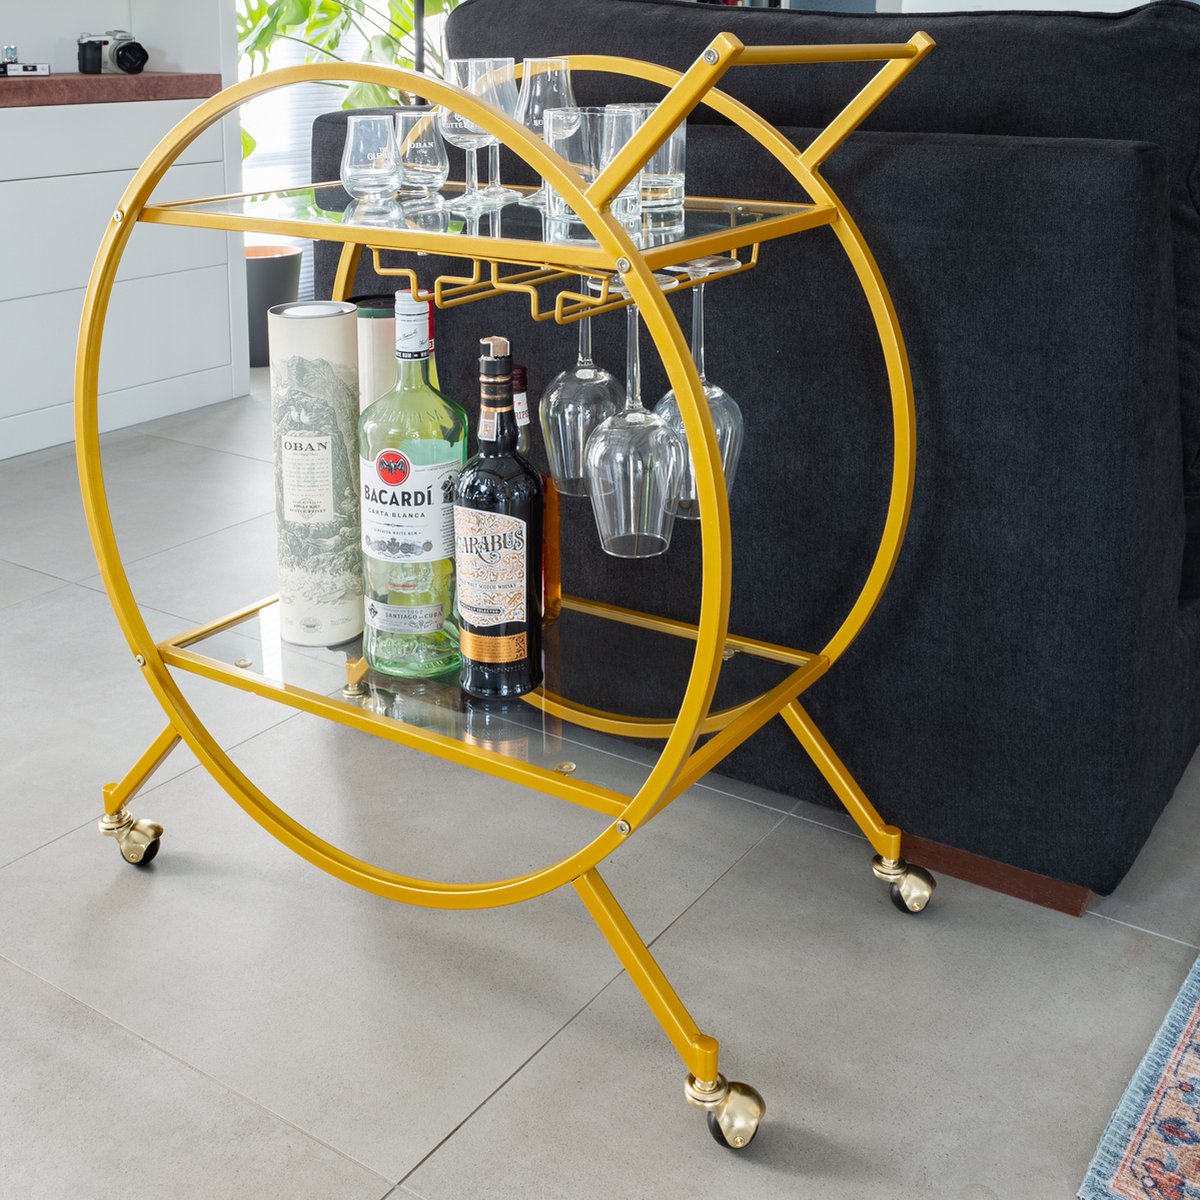 Eleganca Bar trolley with transparent glass tops 2-tier serving trolley Gold